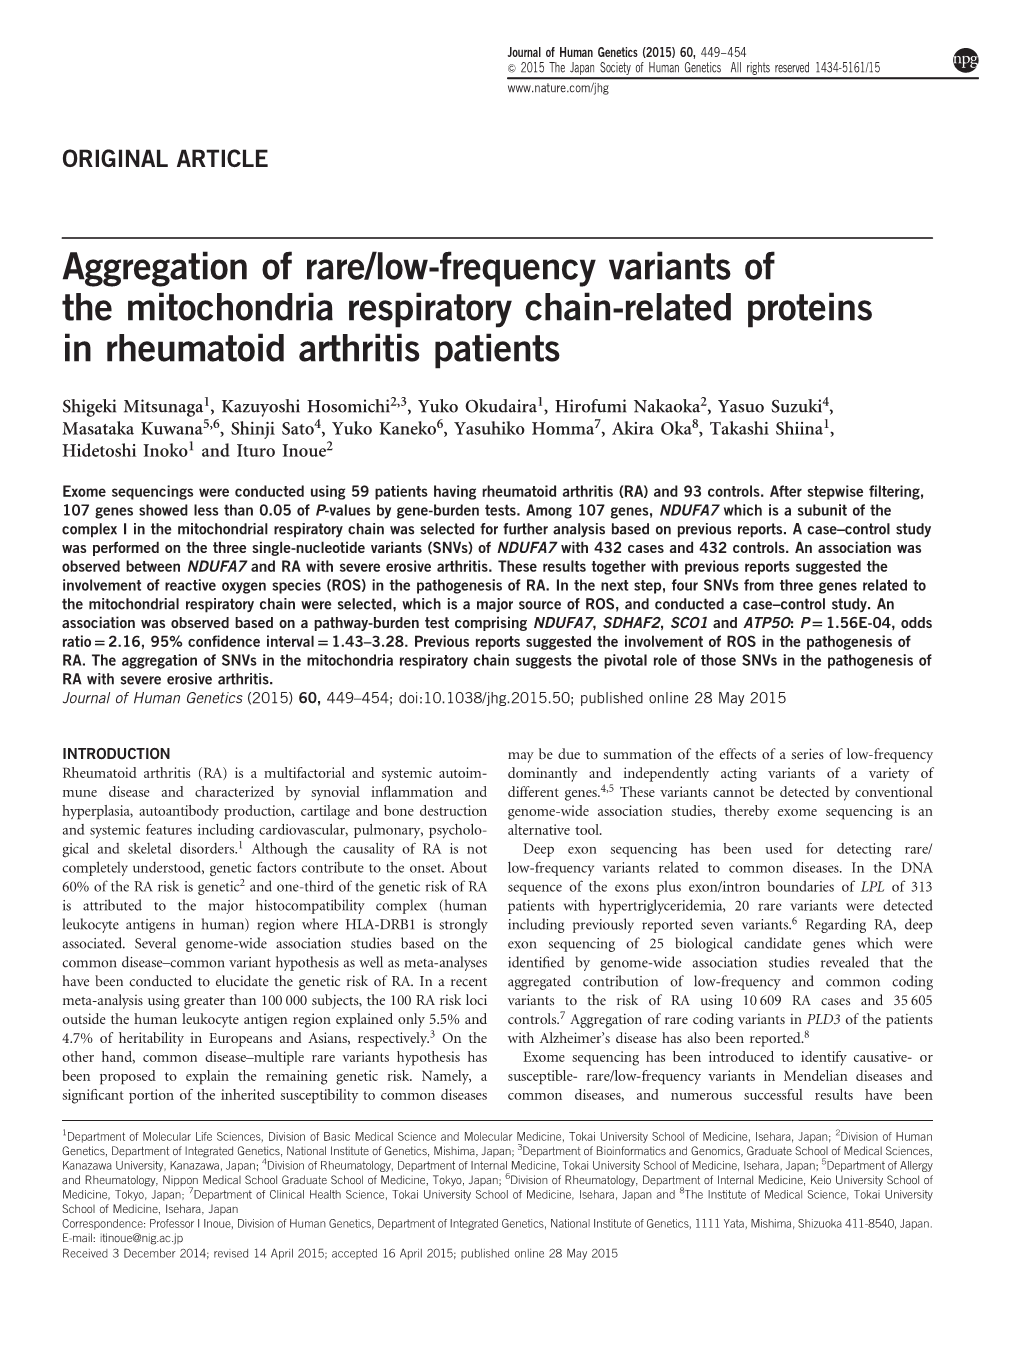 Low-Frequency Variants of the Mitochondria Respiratory Chain-Related Proteins in Rheumatoid Arthritis Patients